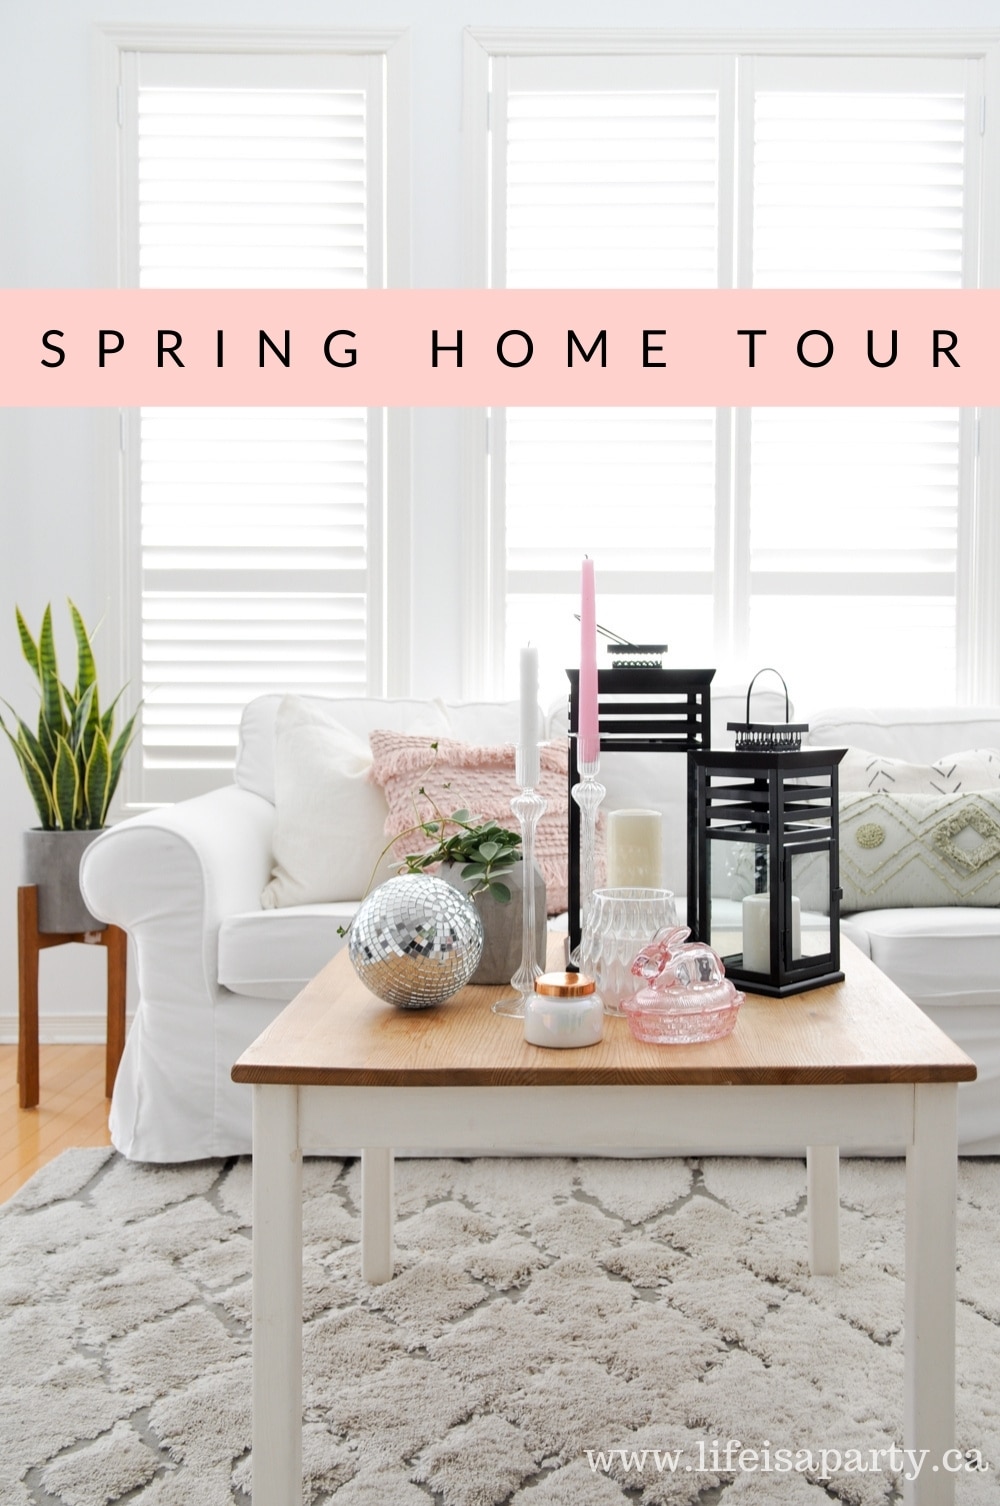 Spring Decorating Ideas Home Tour: lots of plants, and touches of pastel, boho macrame and iridescent touches for spring.